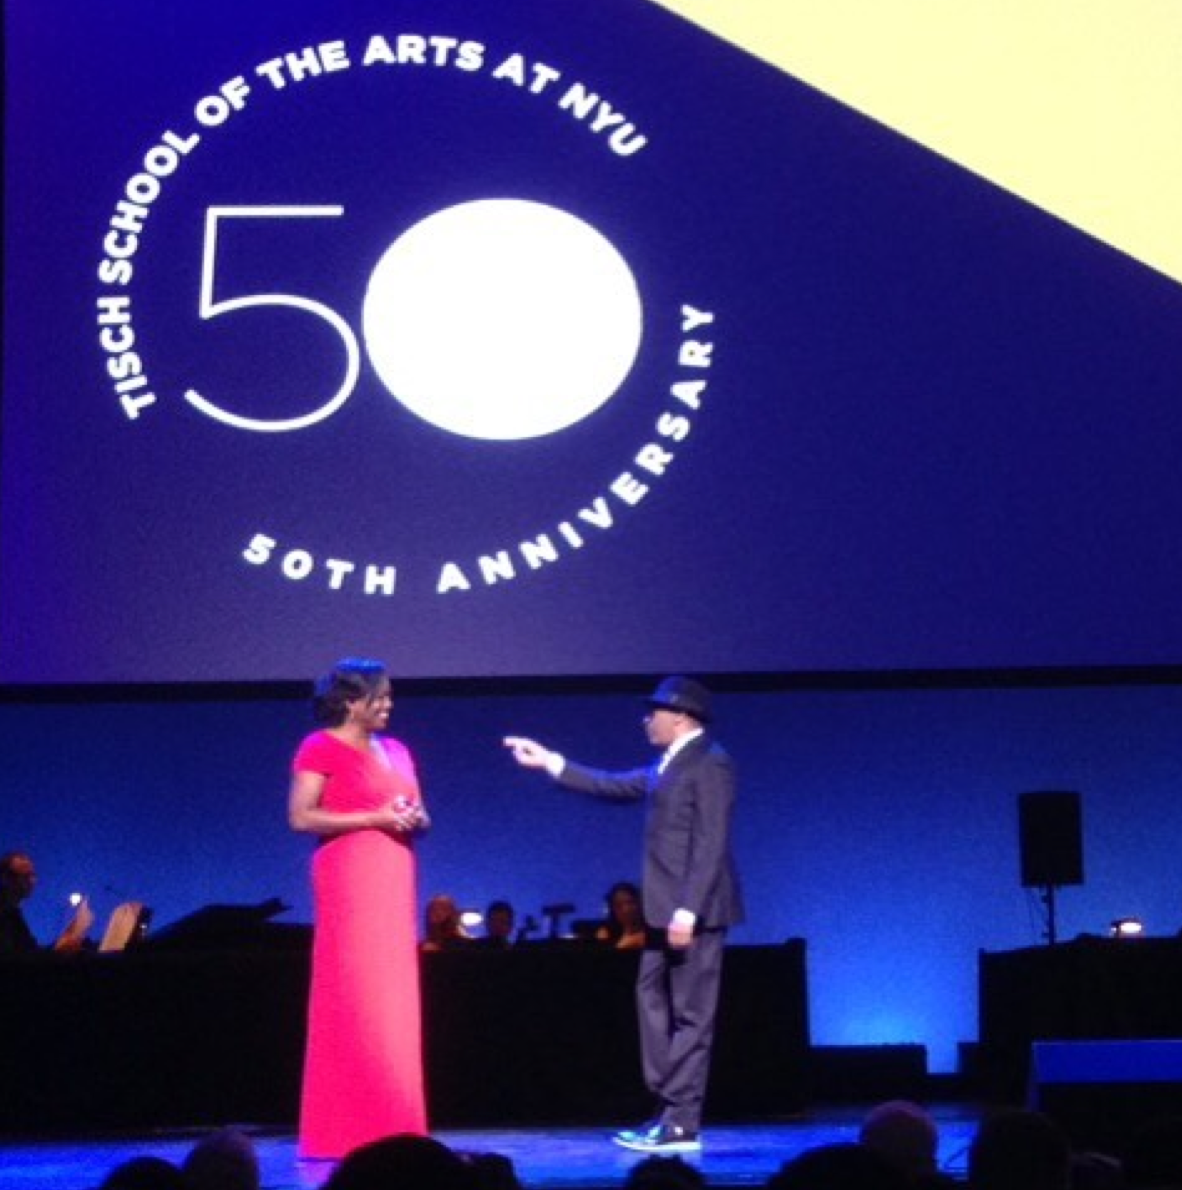 In 2016, Calhoun was awarded "The Big Apple Award" as an honored alumni at the 50th Anniversary Tisch Gala. There she met her inspiration, Professor Spike Lee. 